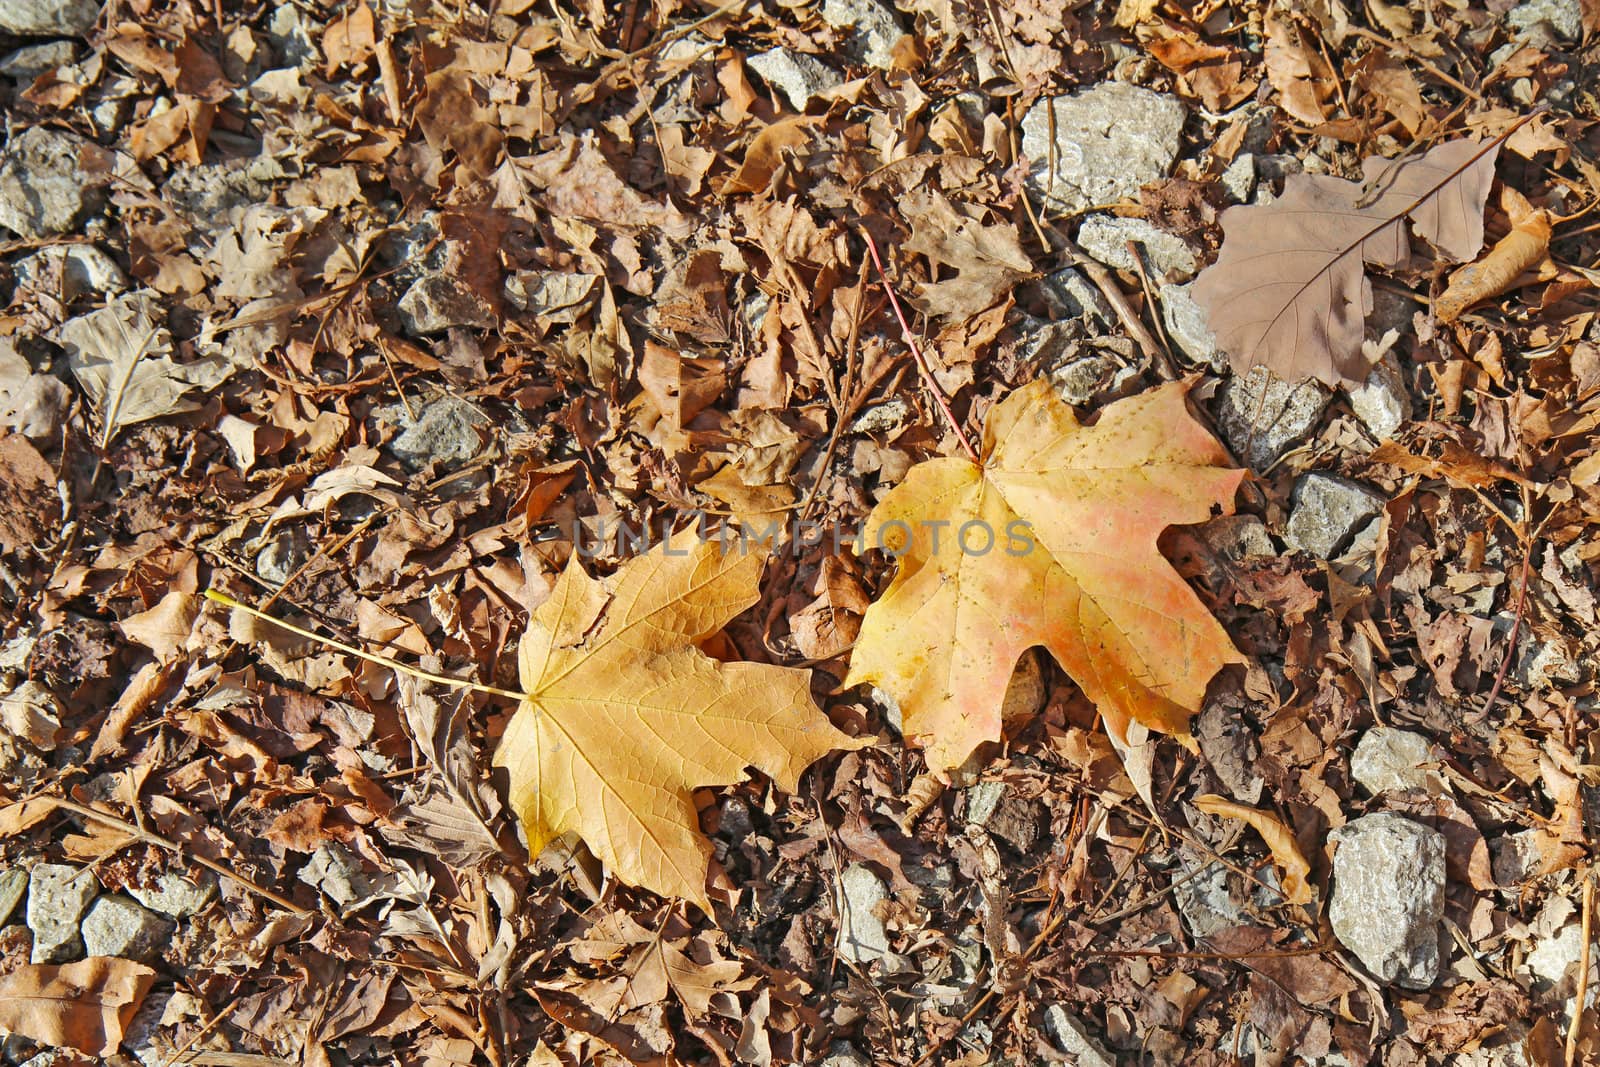 Fallen leaves of red oak (Quercus species) and sugar maple (Acer saccharum) against a background of leaf litter and rocks